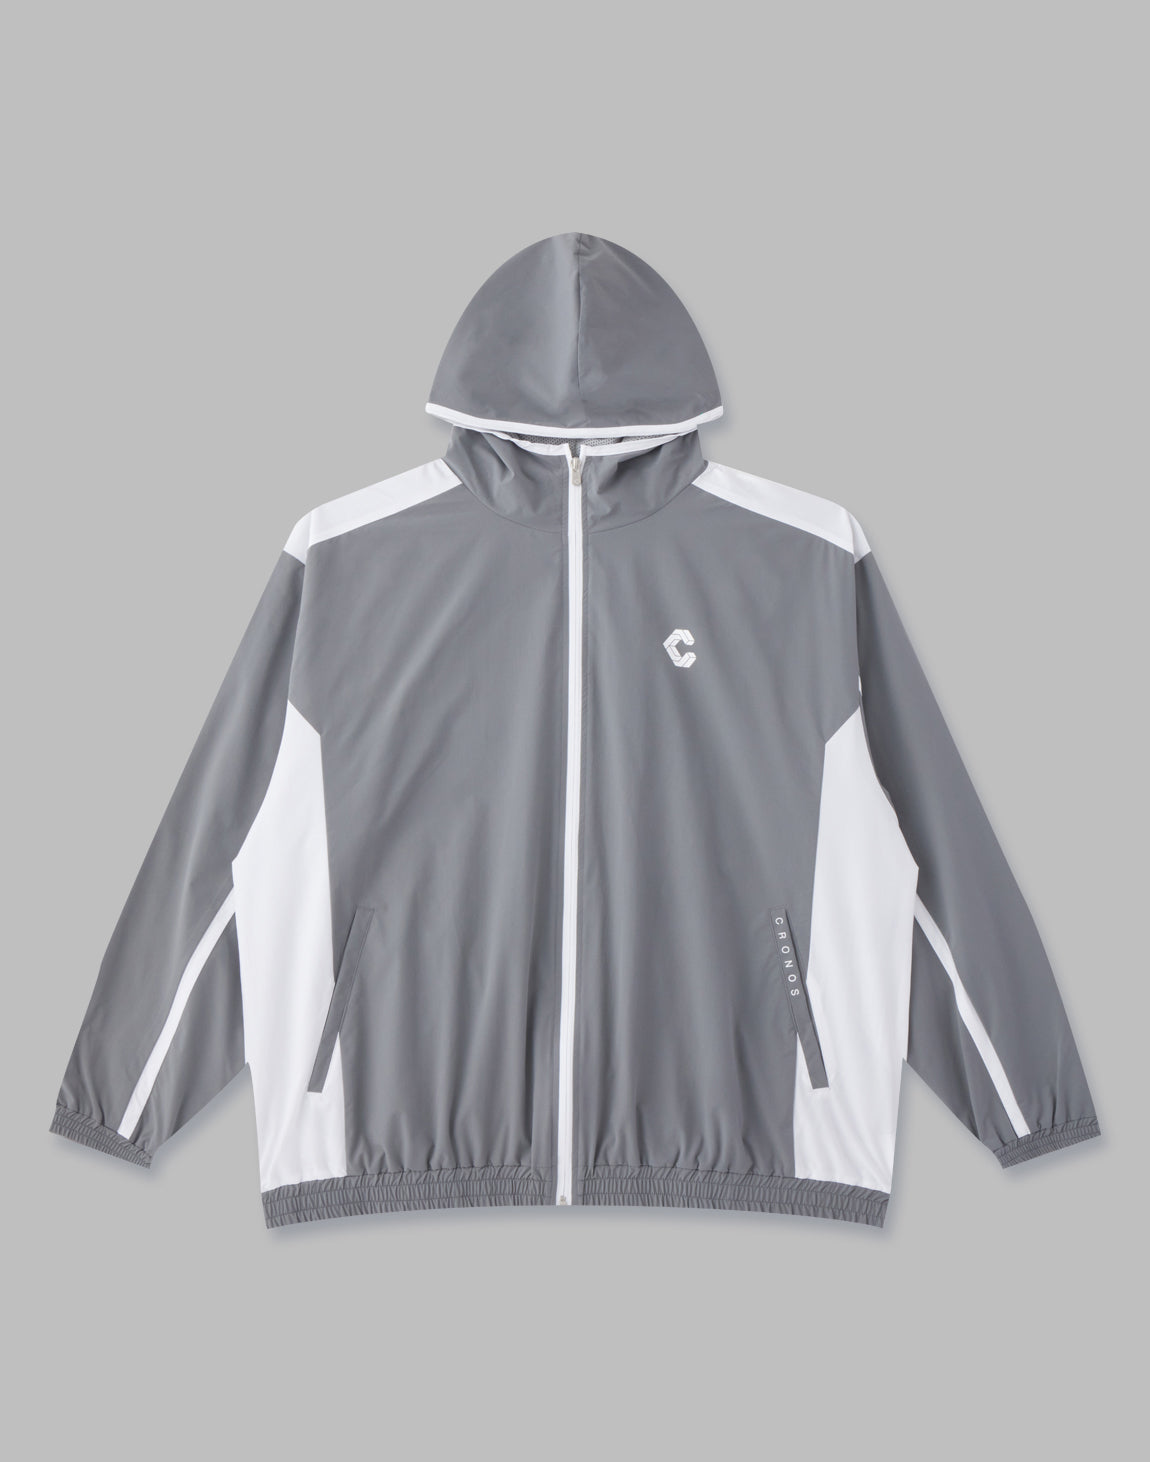 CRONOS ACTIVE LIGHT JACKET – クロノス CRONOS Official Store